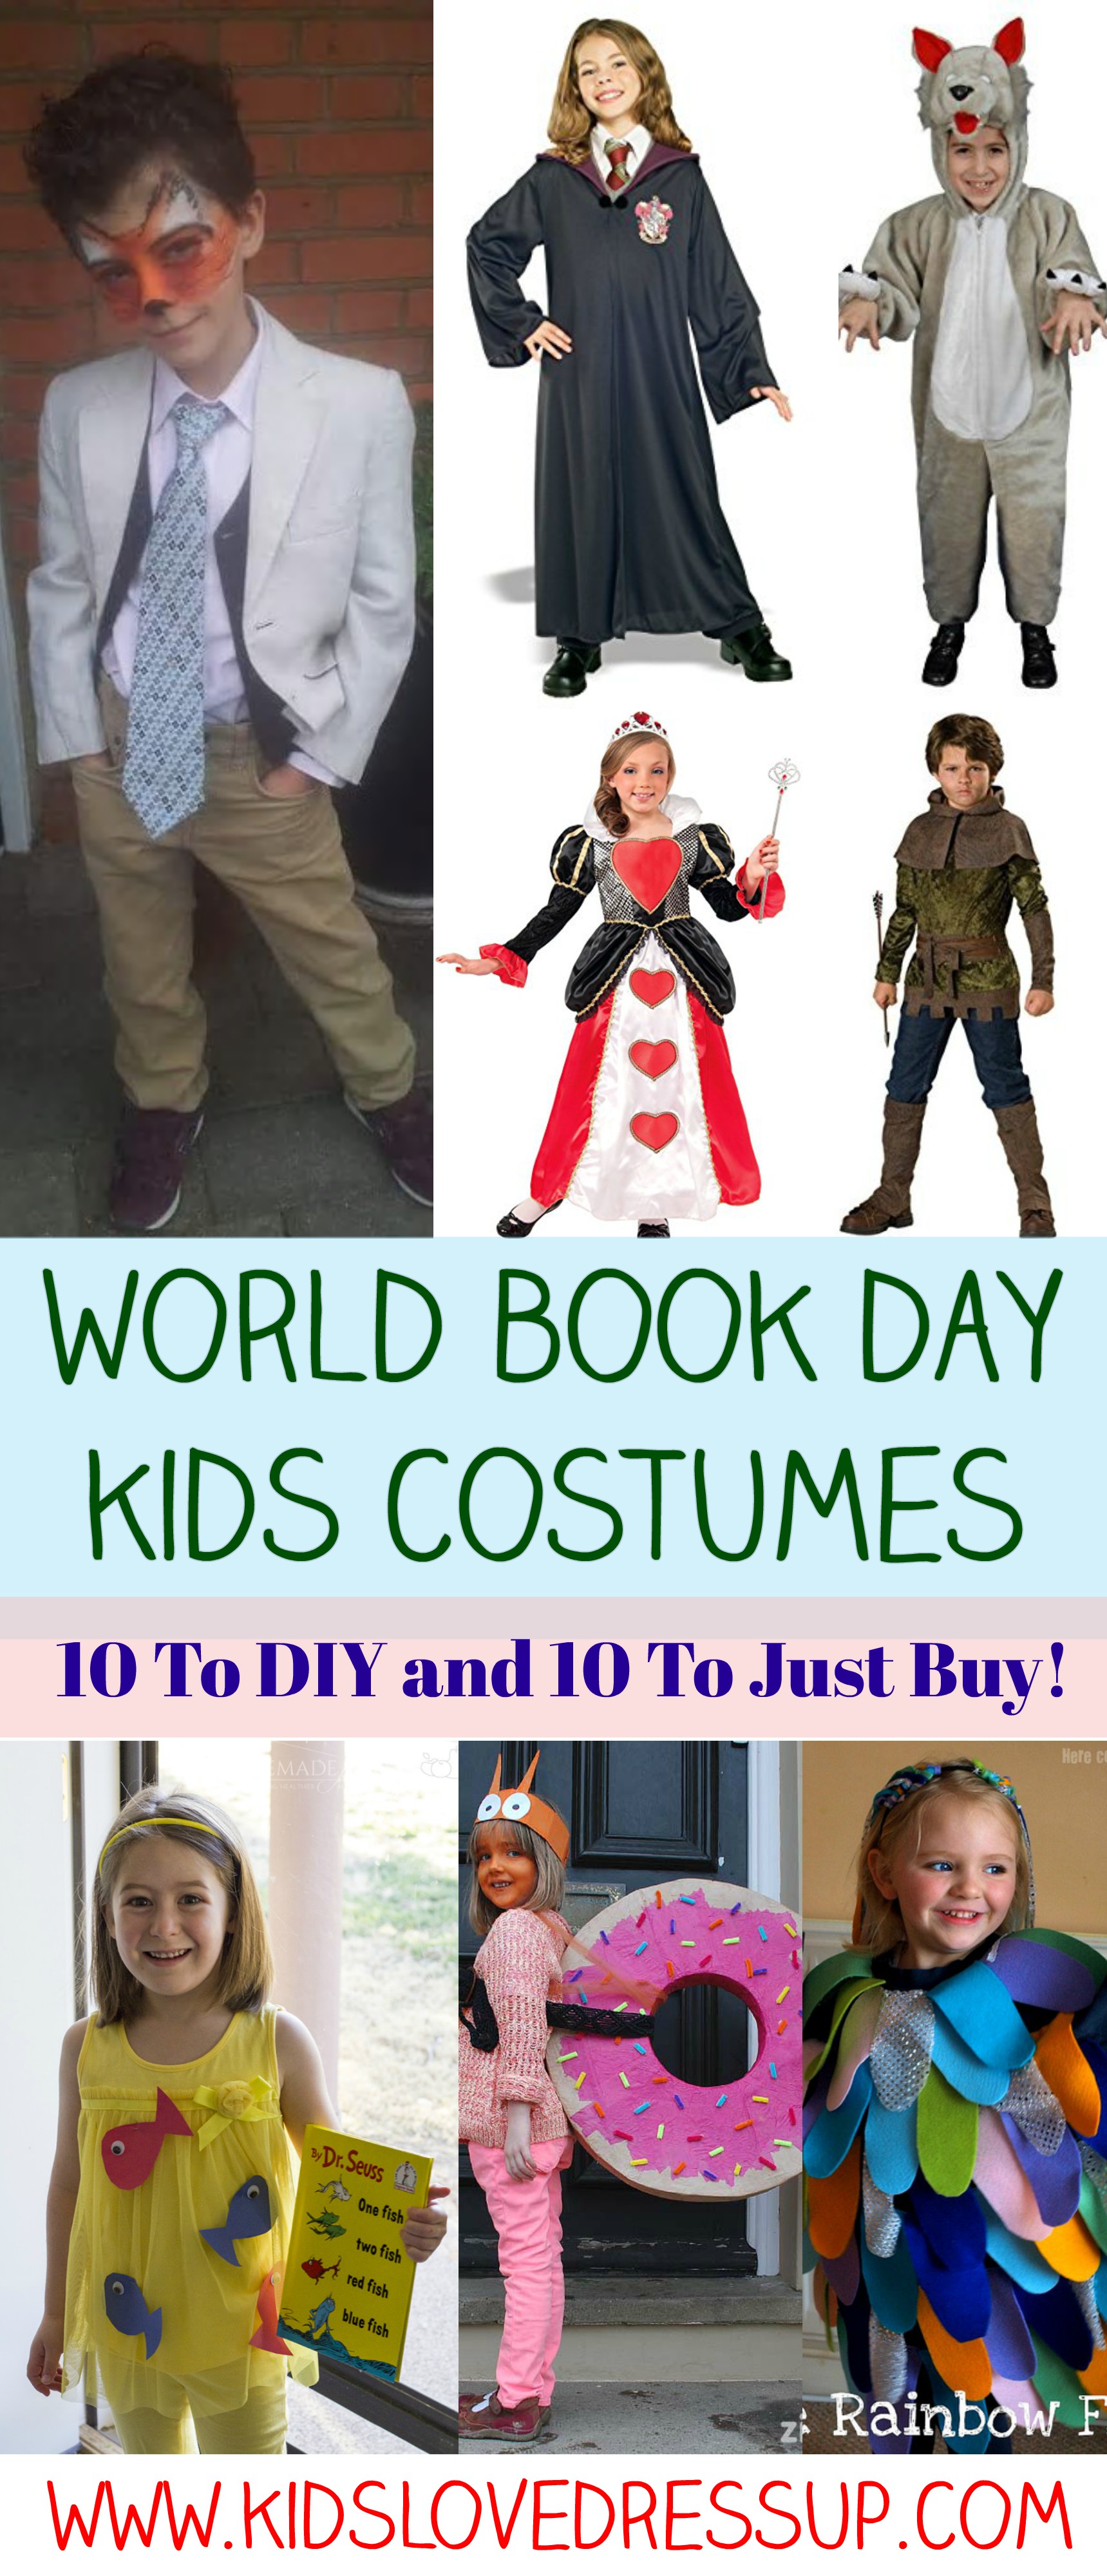 World Book Day Kids Costumes - 10 To DIY, 10 To Just Buy